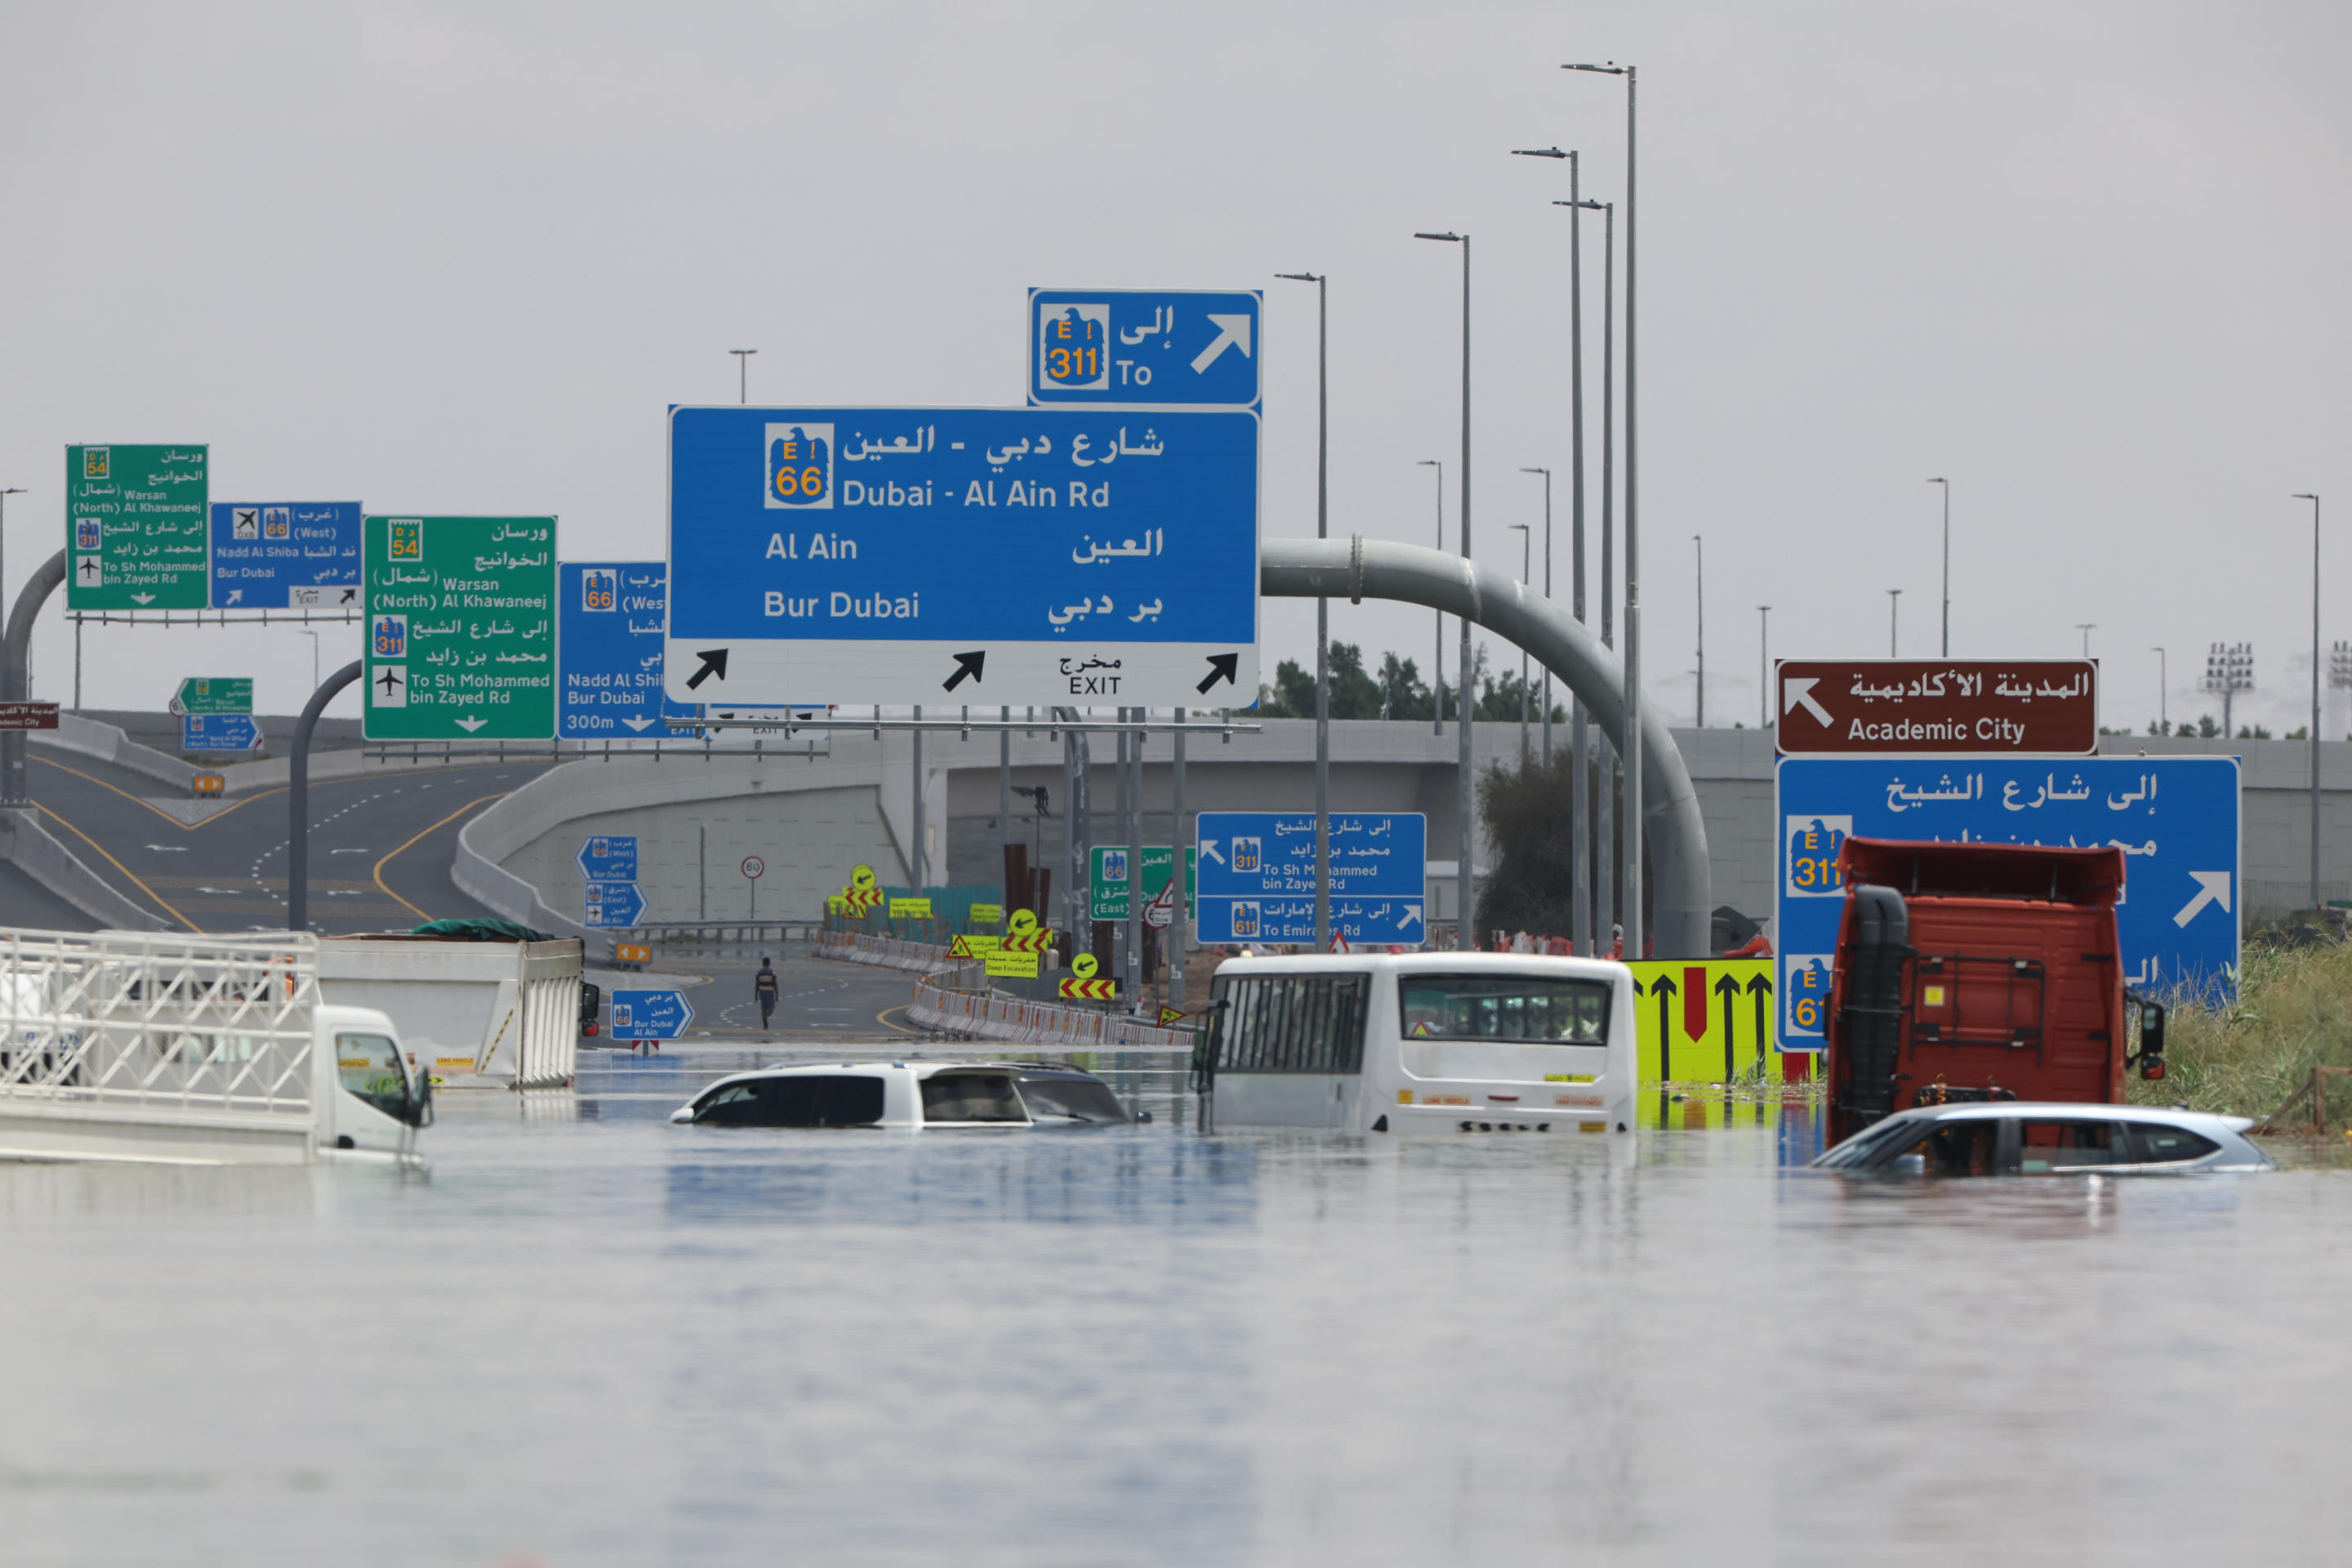 Abandoned vehicles are seen on a flooded highway near the Dubai airport.